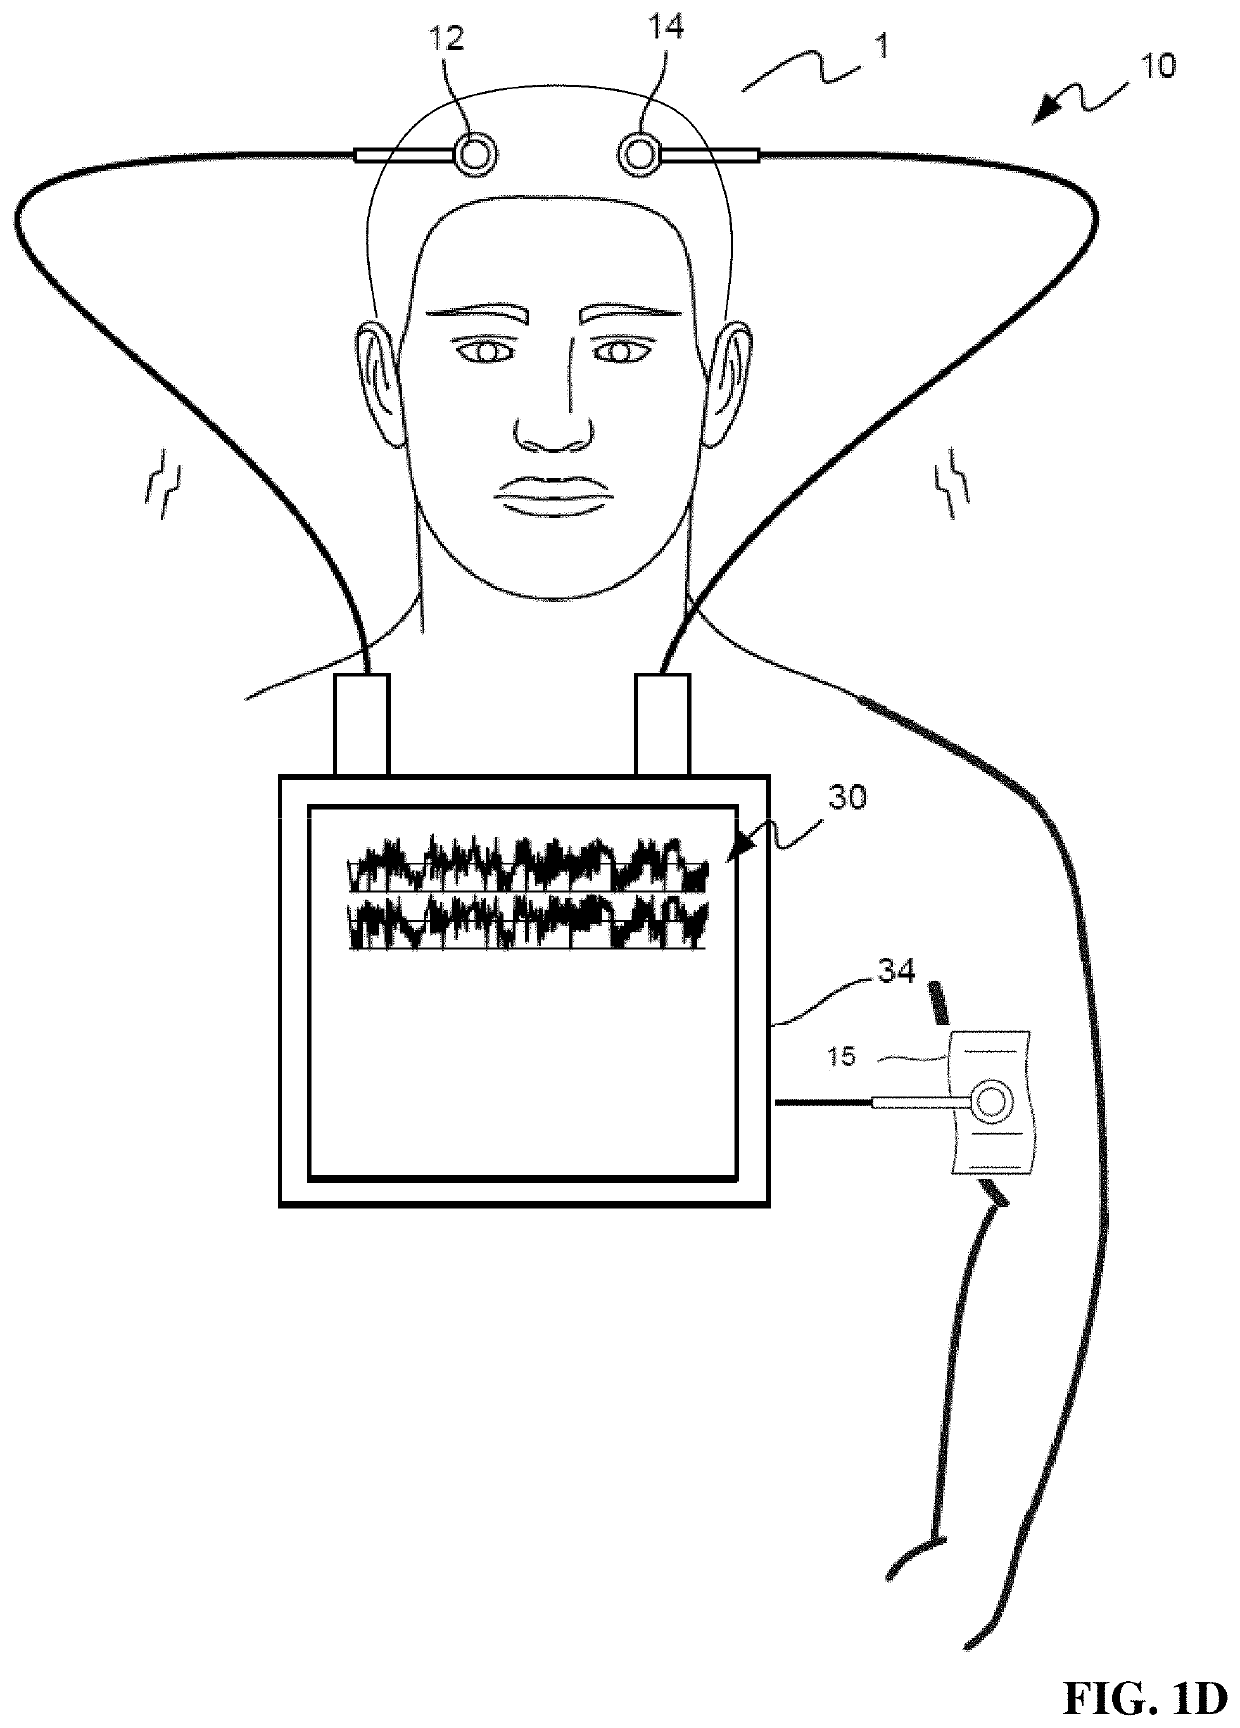 Systems methods and devices for closed loop stimulation to enhance stroke recovery